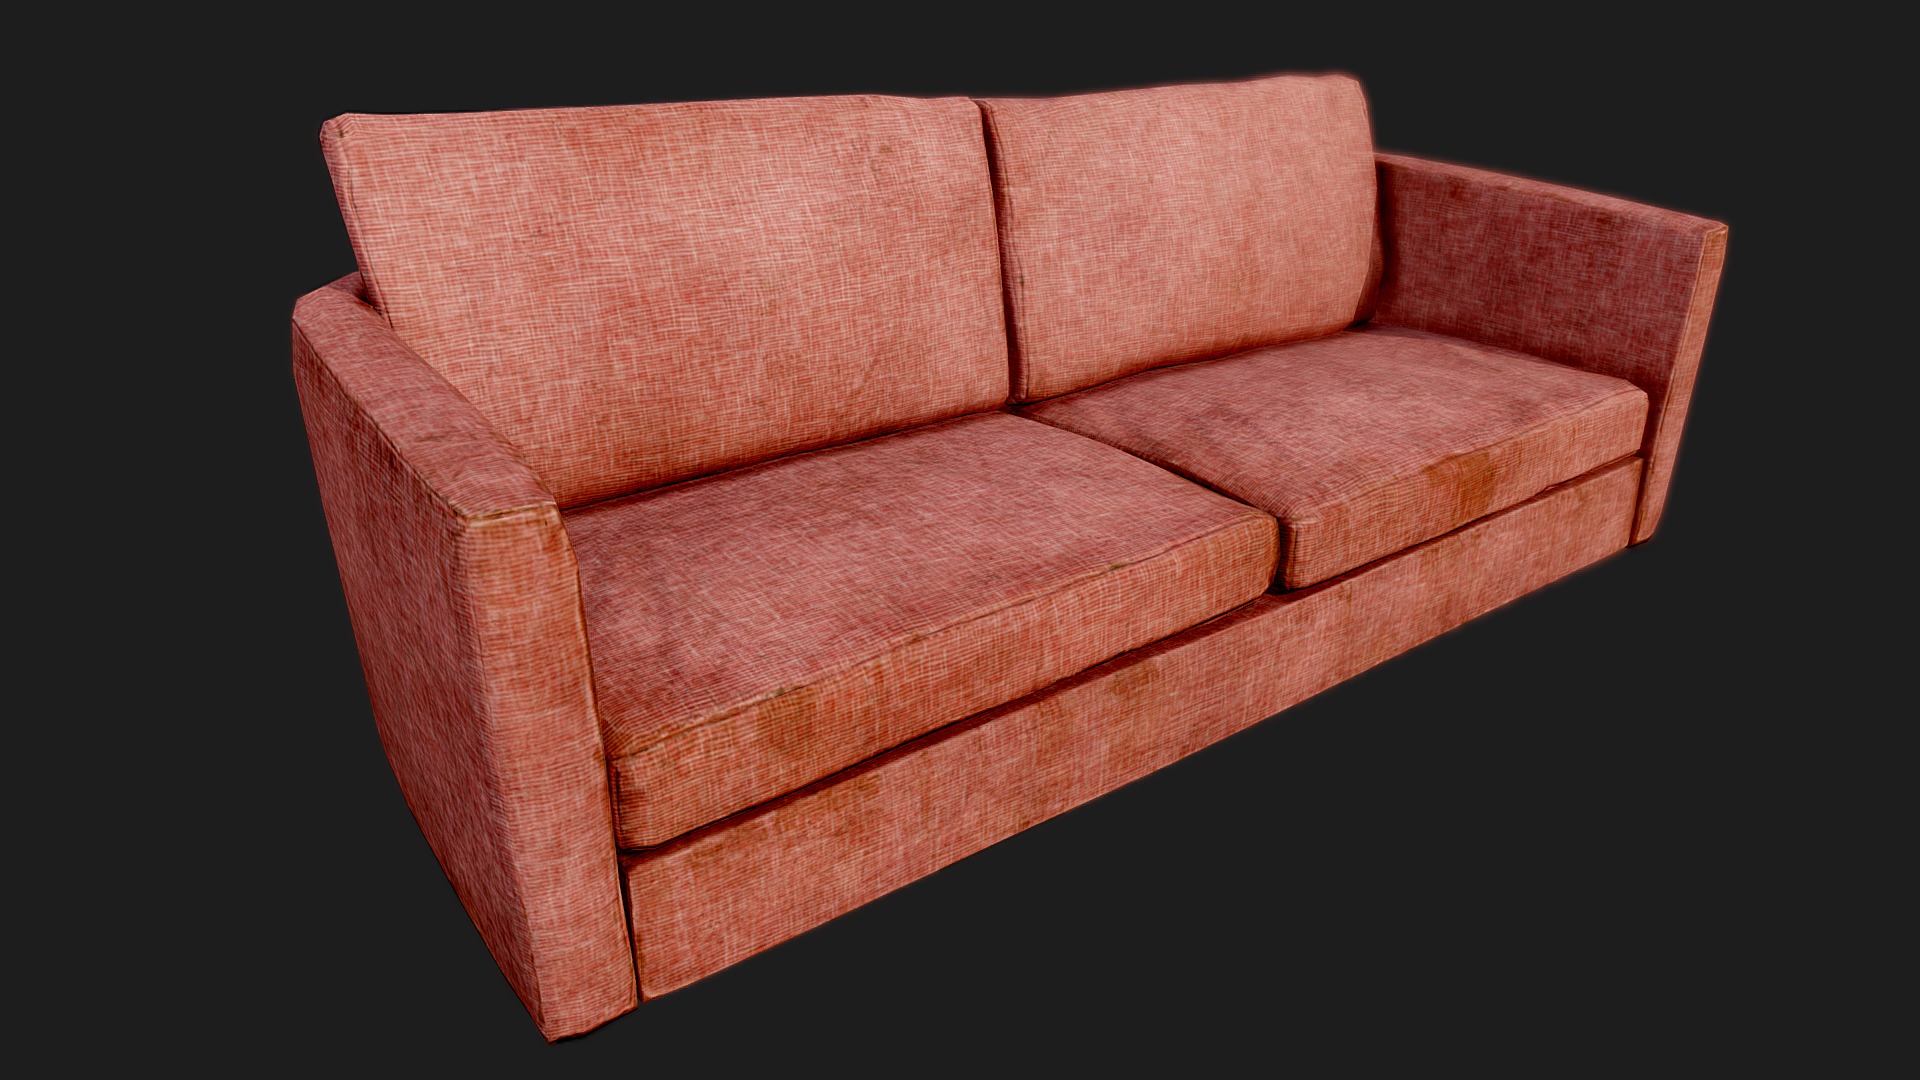 3D model Old Dirty Couch 02 Red – PBR - This is a 3D model of the Old Dirty Couch 02 Red - PBR. The 3D model is about a brown couch with a black background.